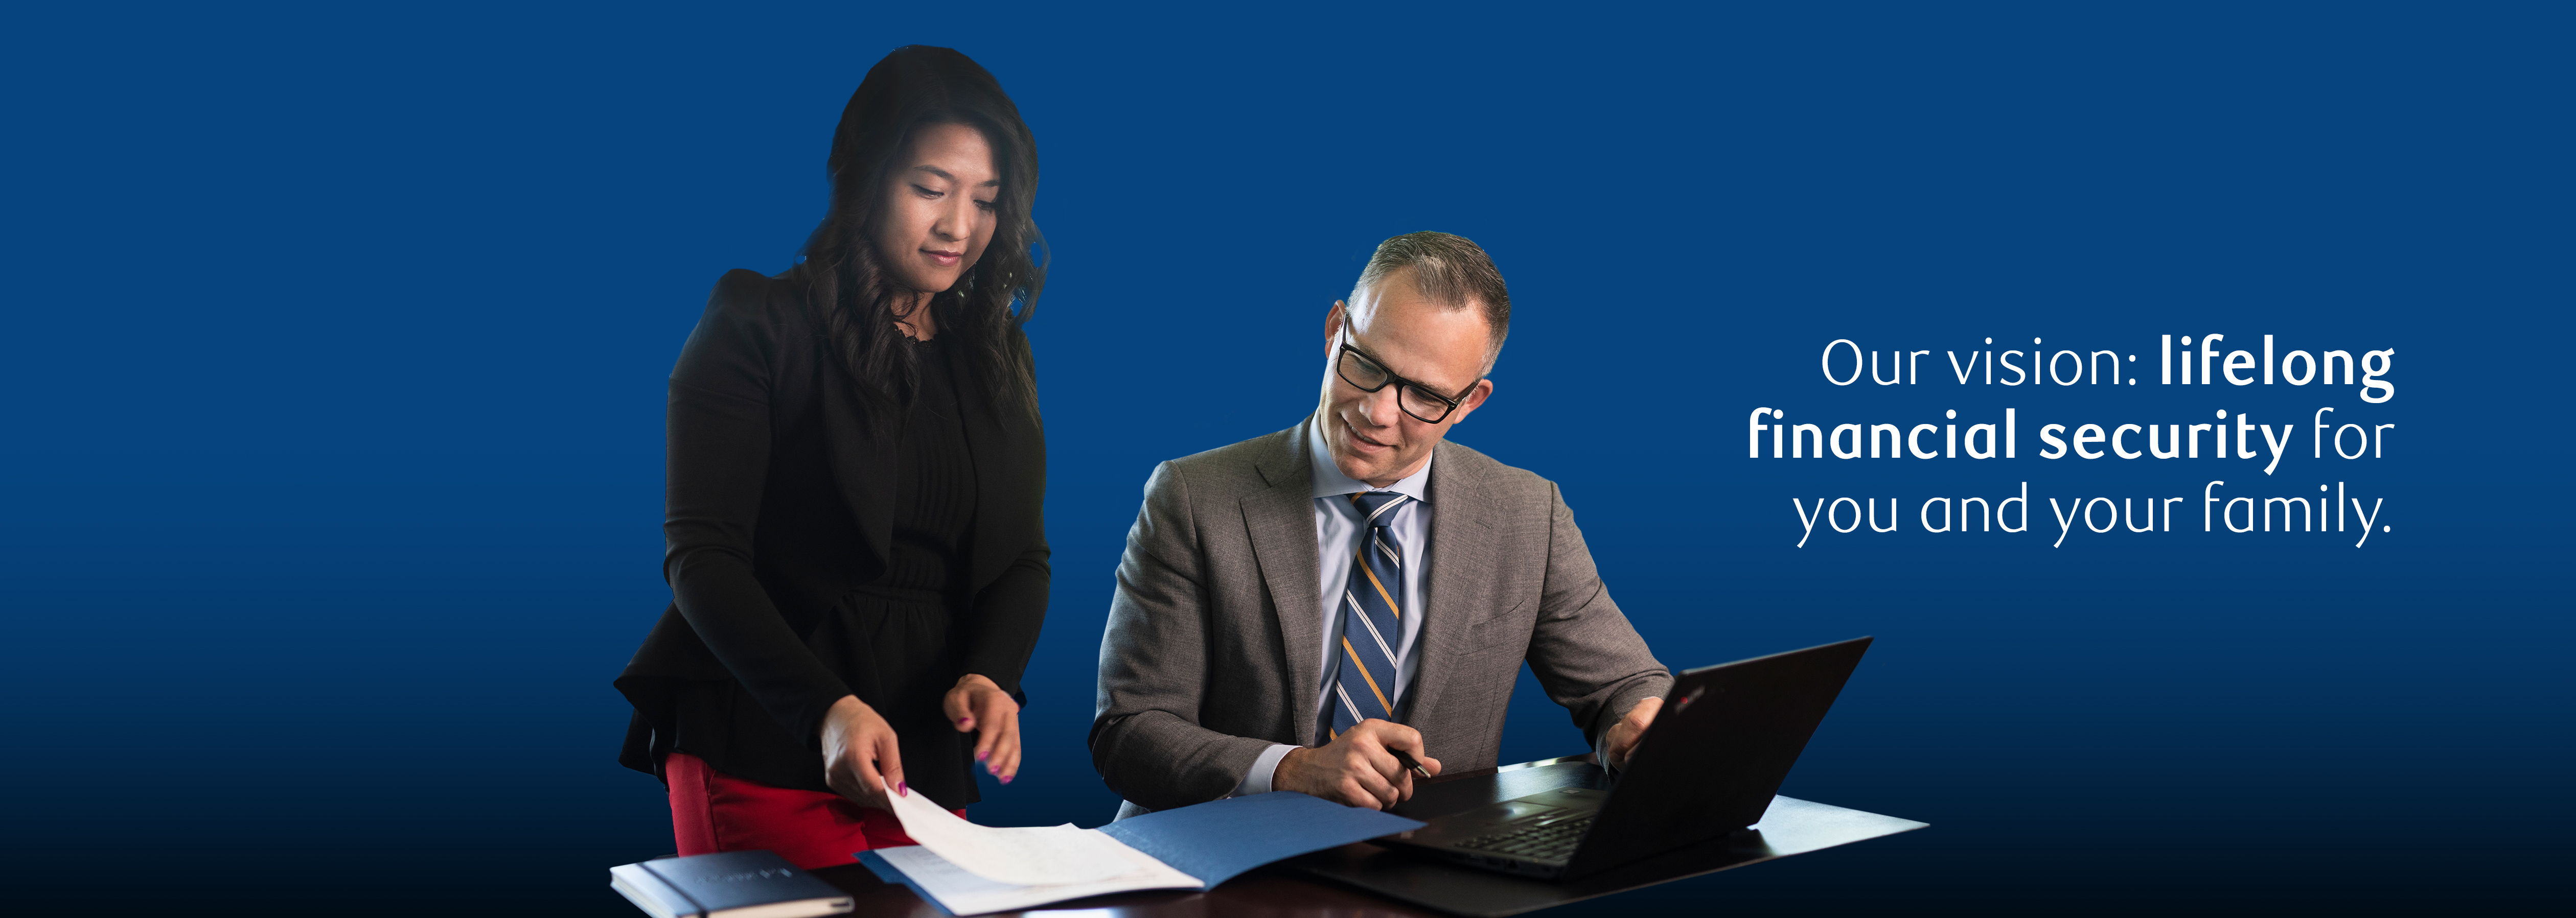 Investment Advisor & Financial Planner Jason de Weerd and Administrative Assistant Colleen Hui working together 